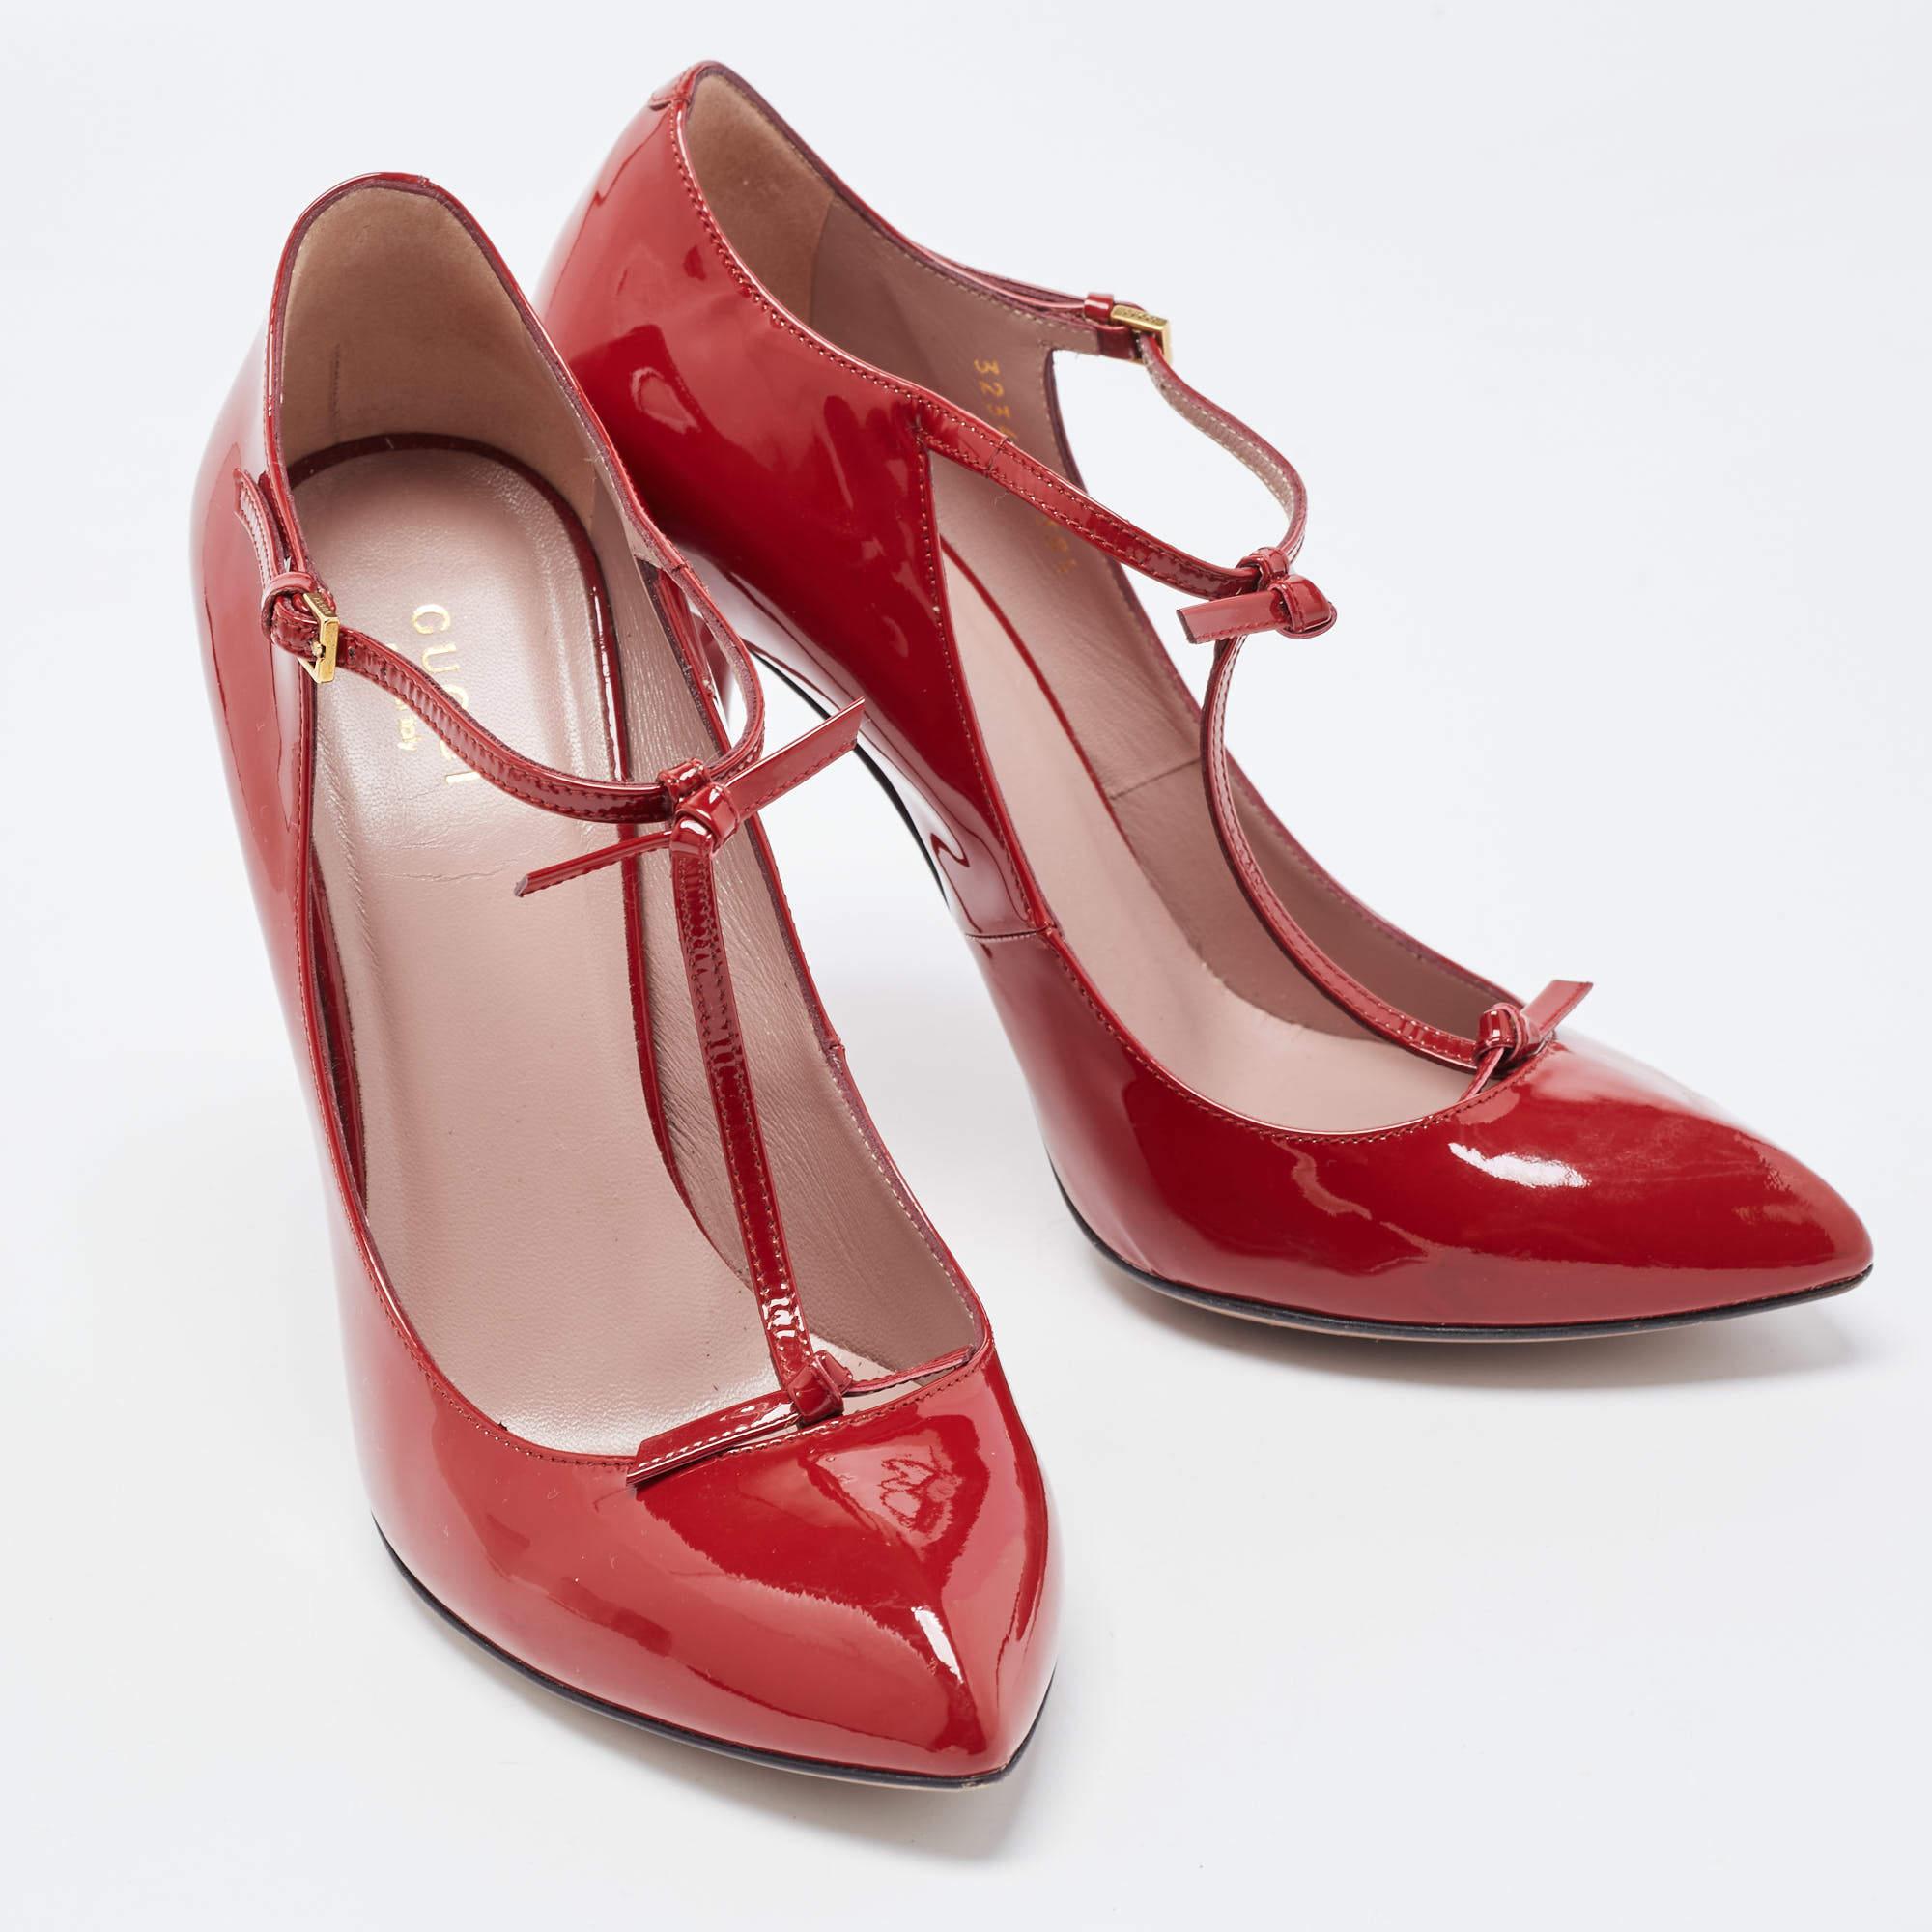 Gucci Red Patent Leather Bow Accents T-Strap Pumps Size 38.5 2